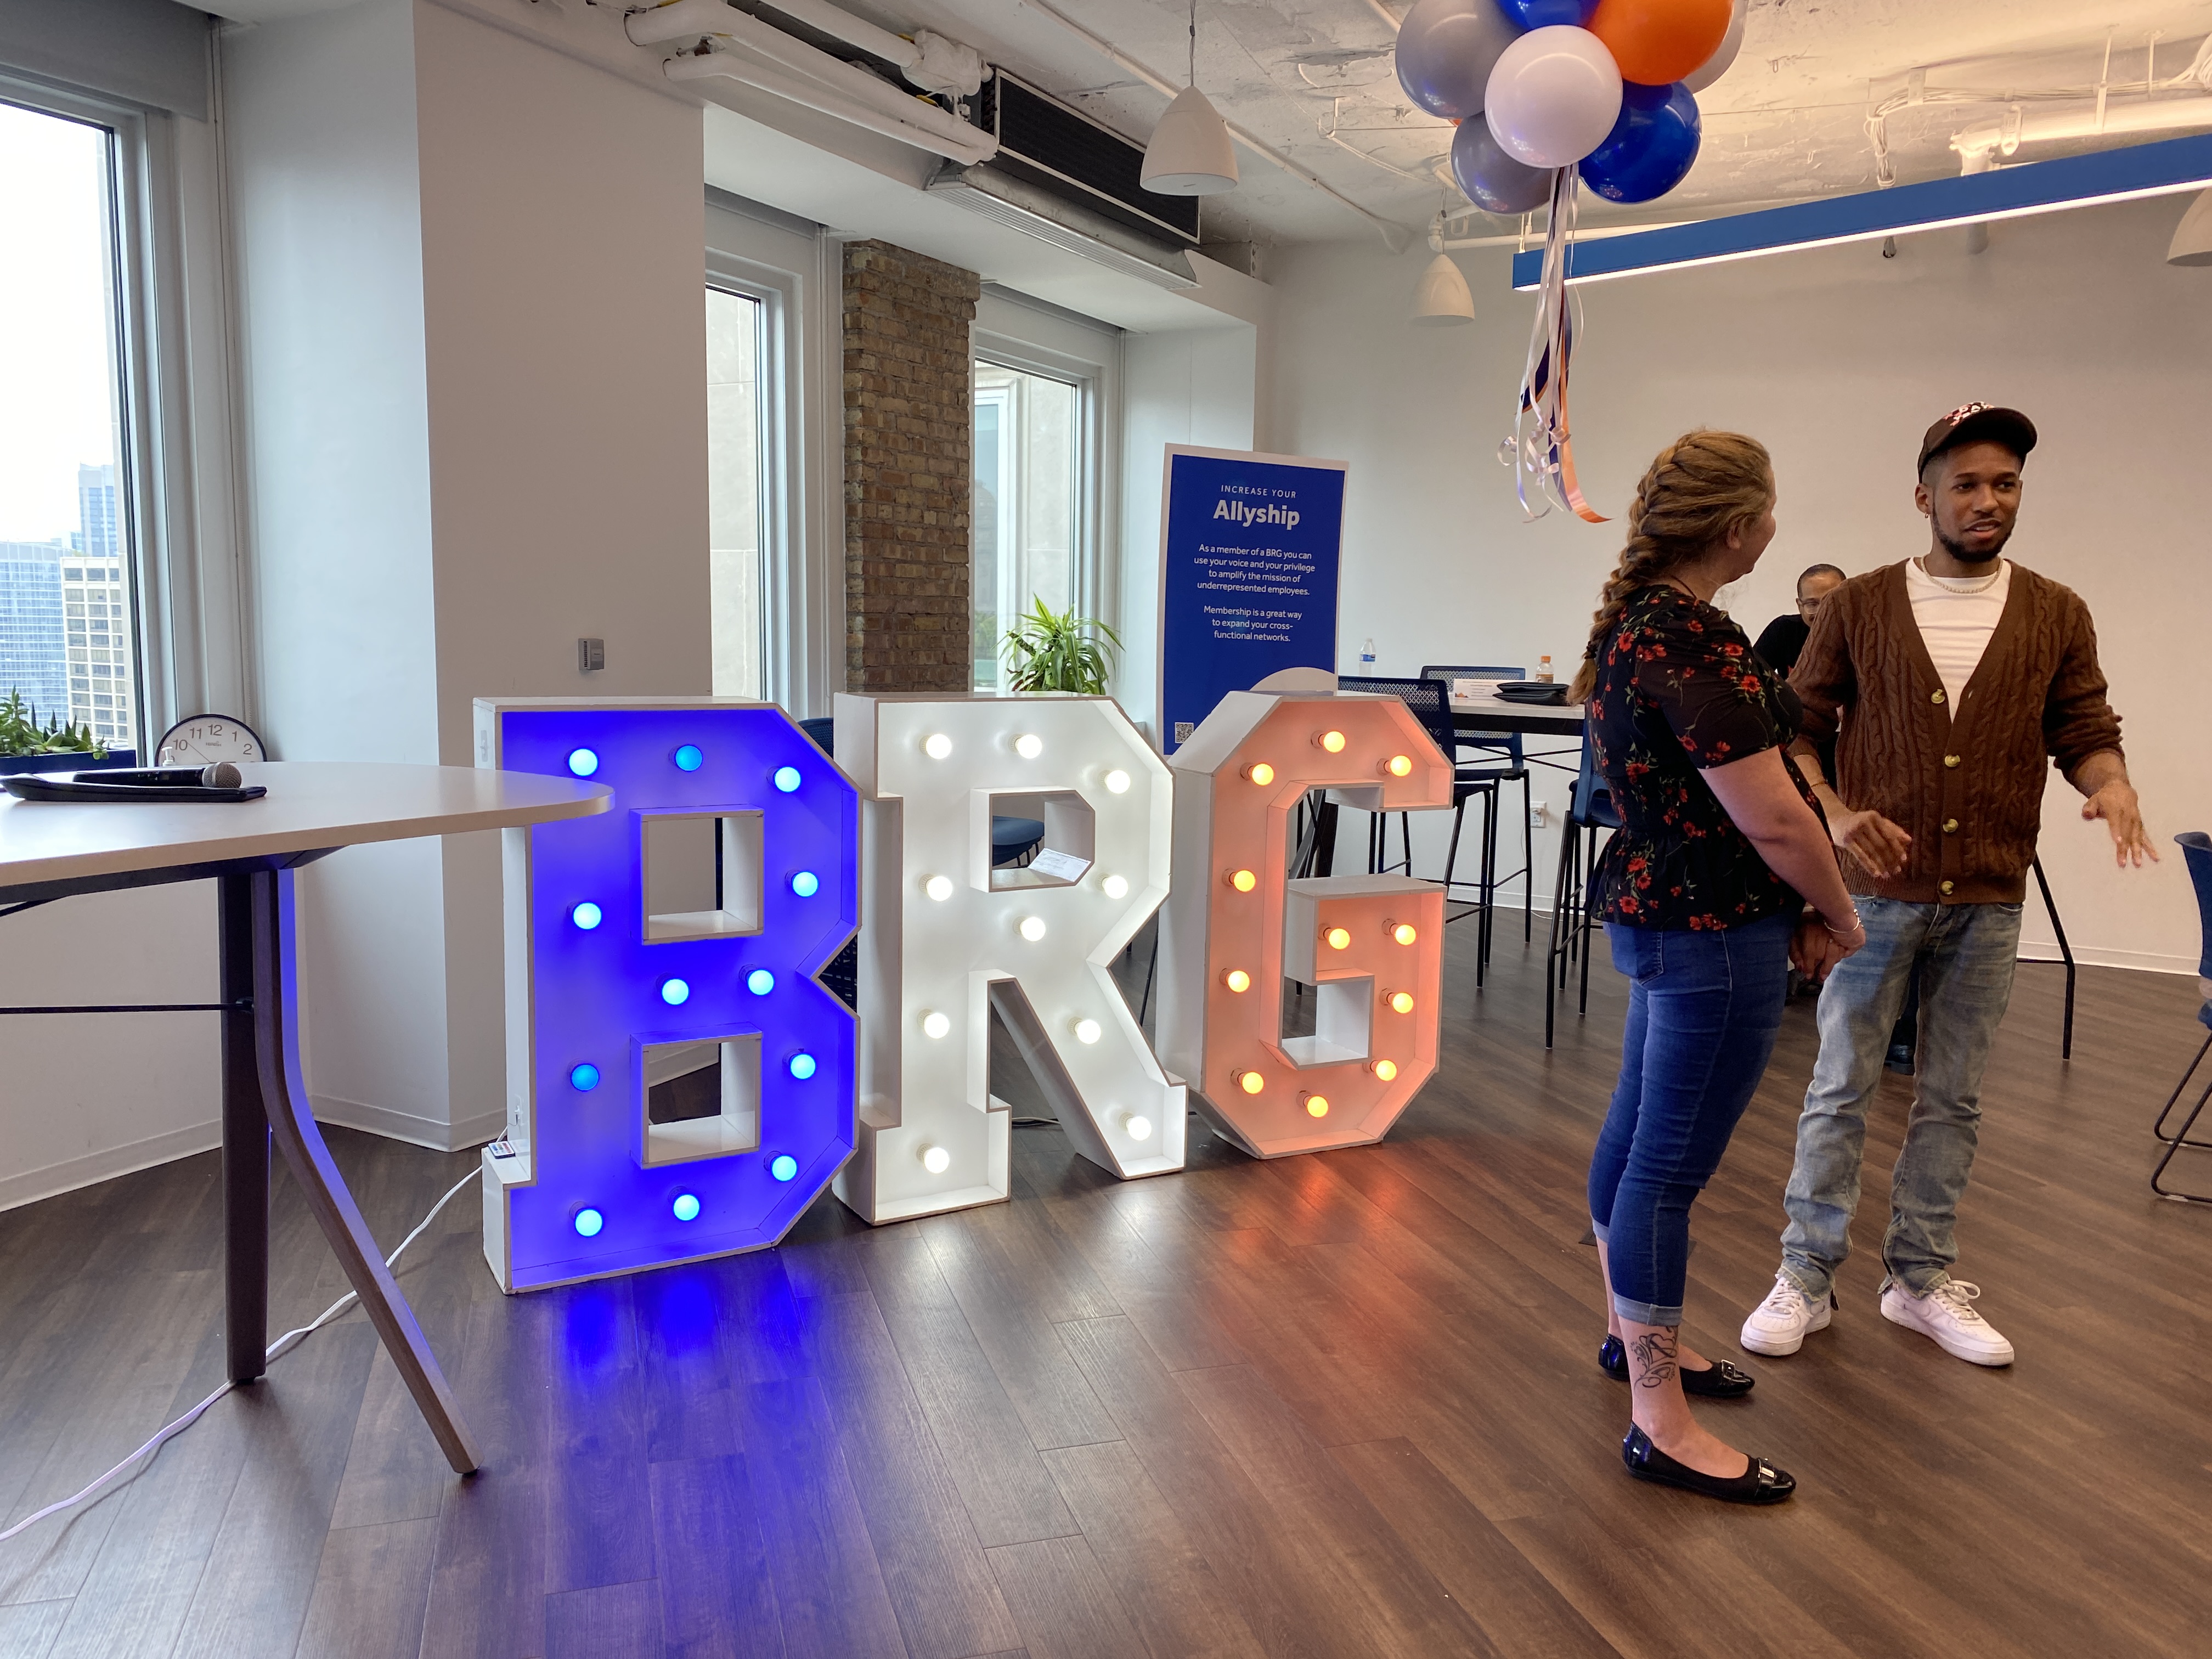  Large letters reading “BRG” inside OppFi’s office signify a business resource group event, with team members standing nearby.